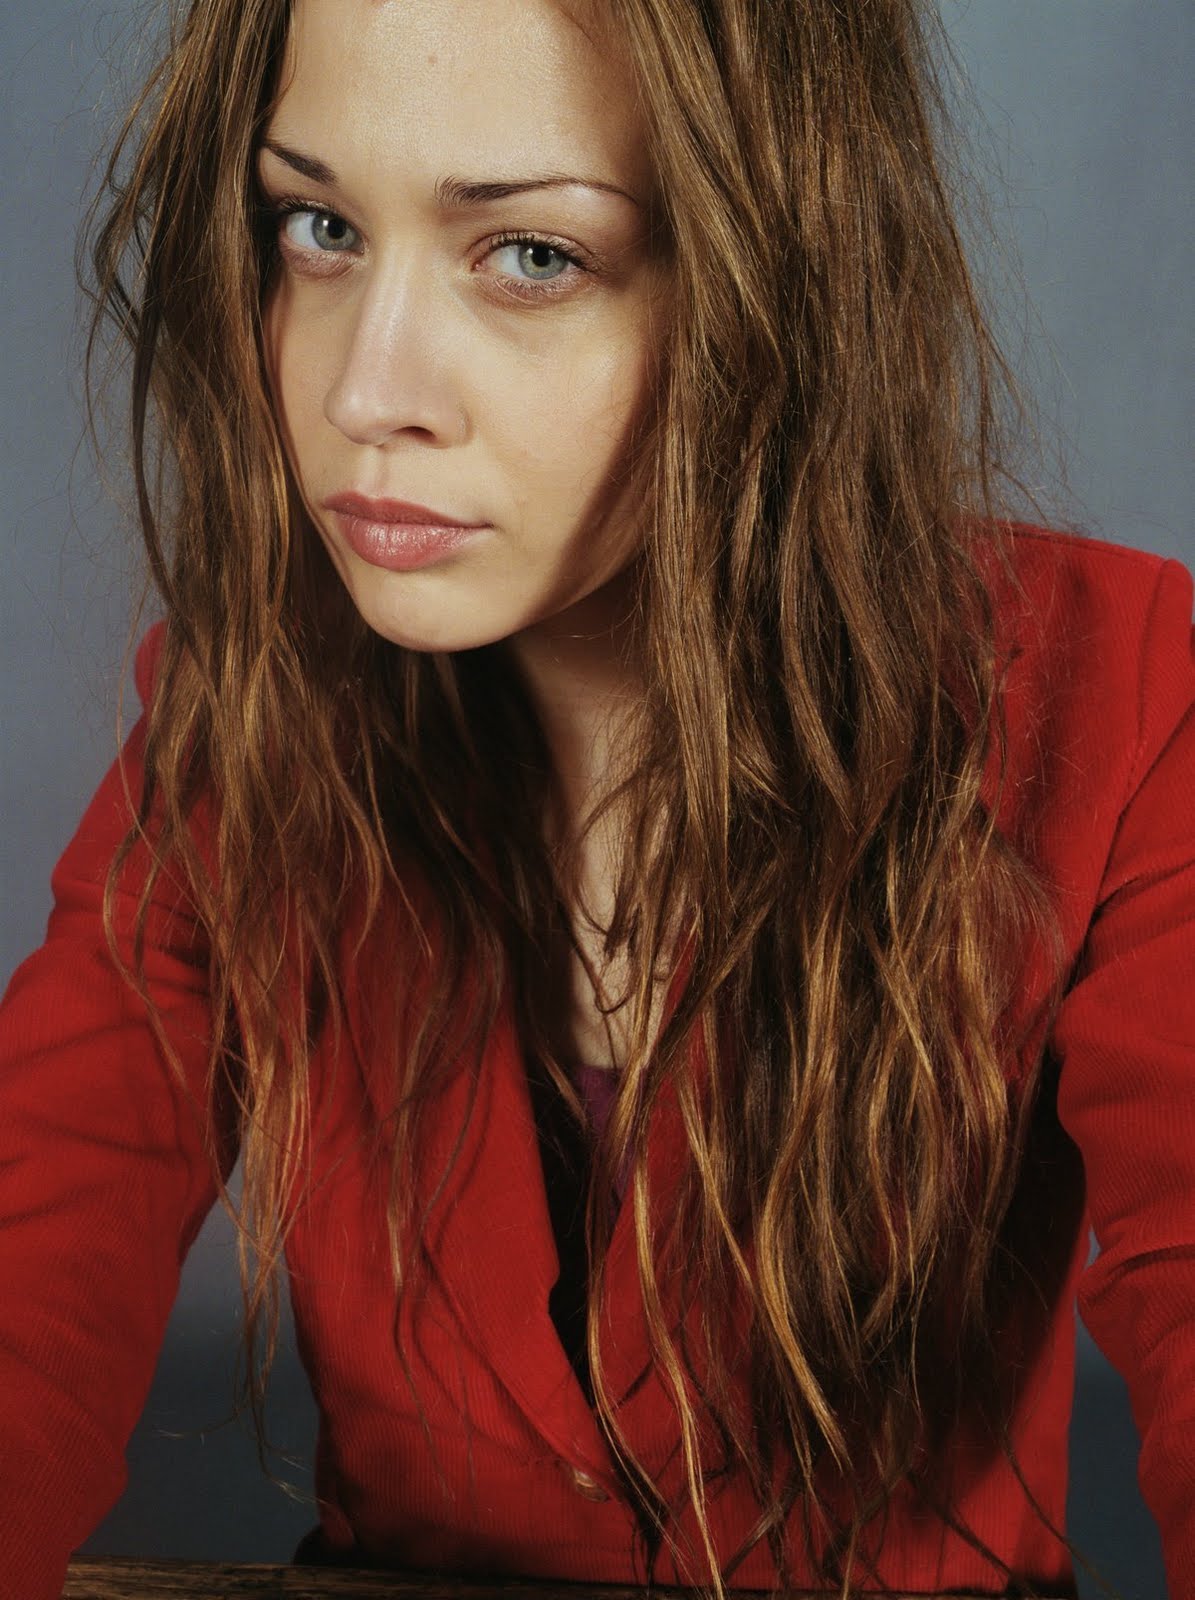 Fiona Apple Biography , Fiona Apple images , video